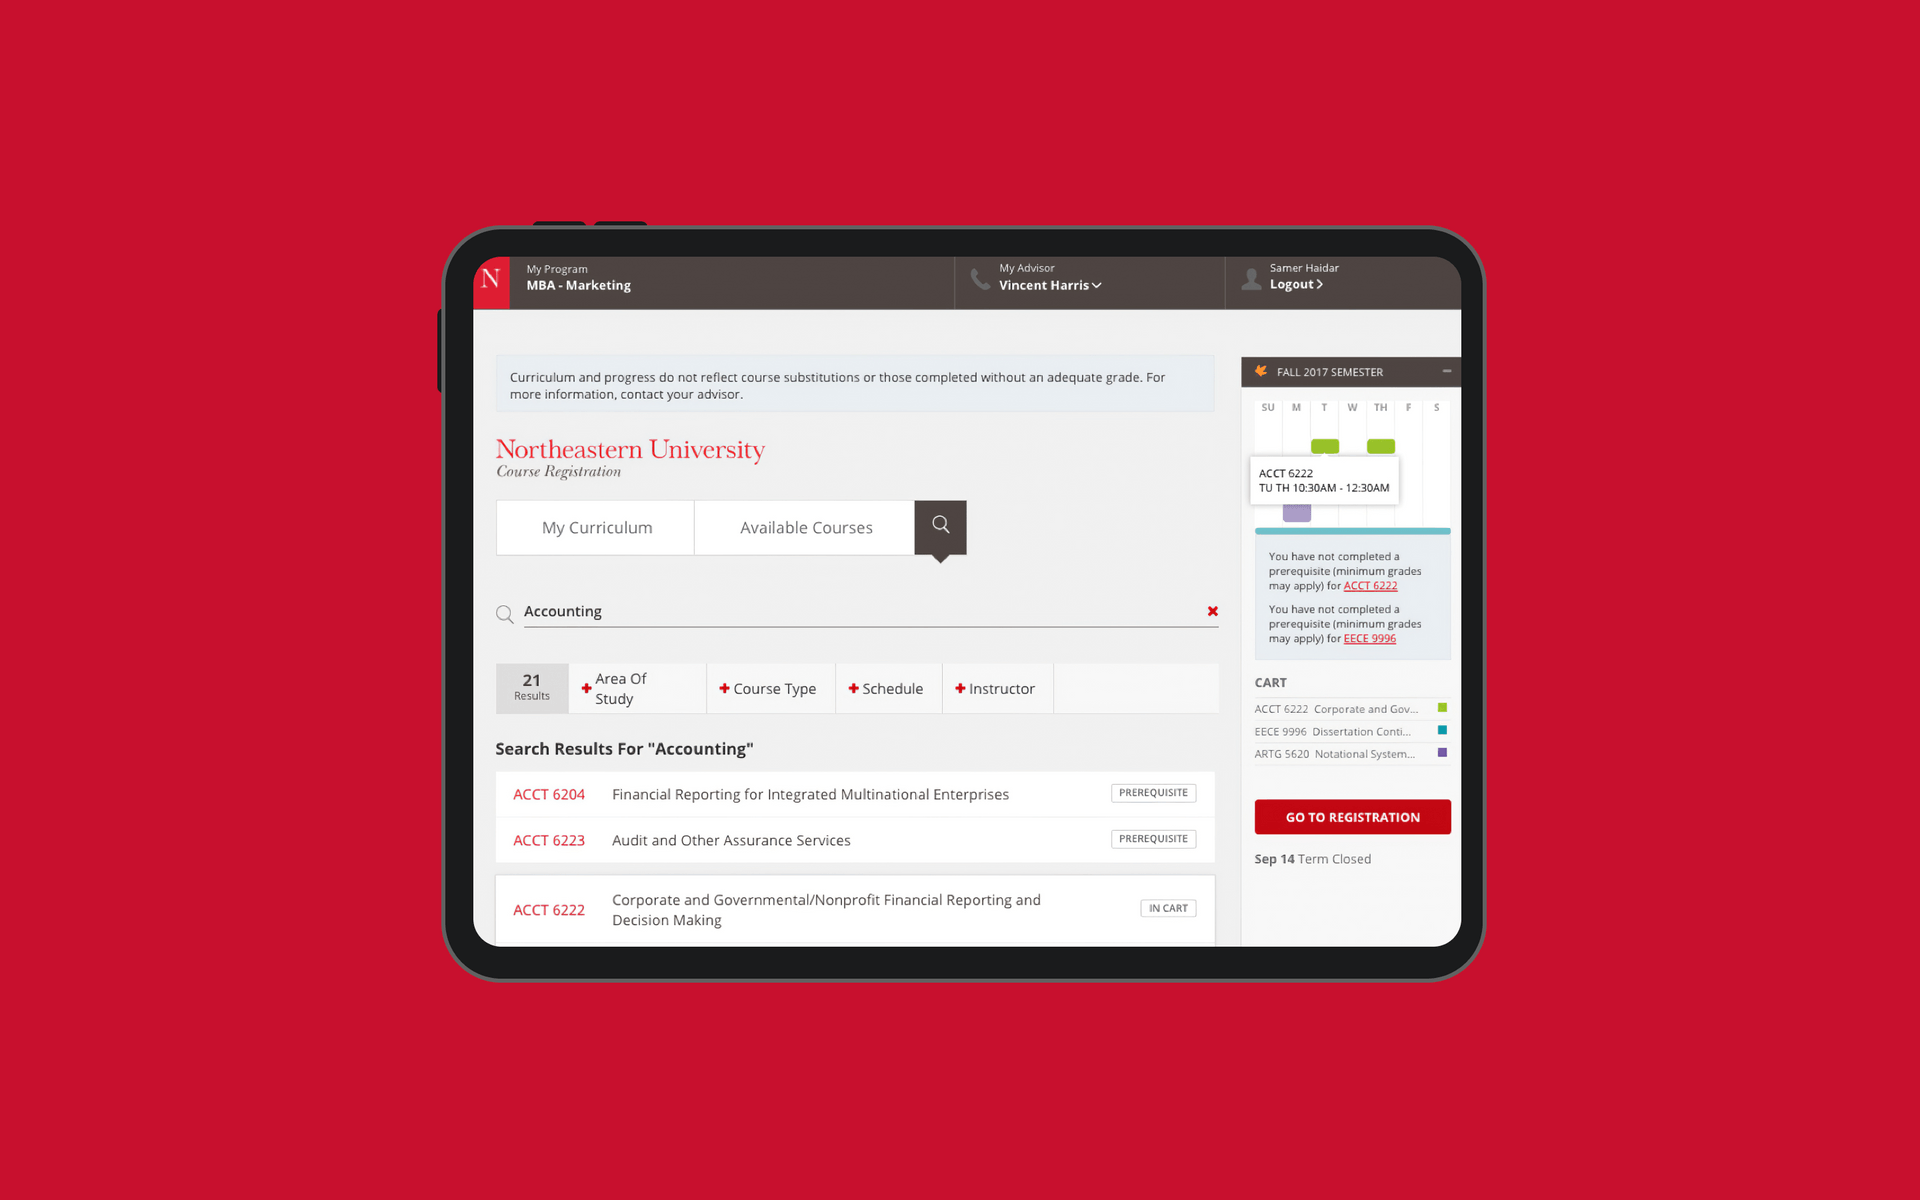 The new Northeastern online course registration, which features a clean UI in Northeastern's red, gray, and white color palette, runs on a tablet. The user can search for courses and apply filters, add courses to a cart, view an example weekly schedule, get warnings about prerequisites, and then go to registration.